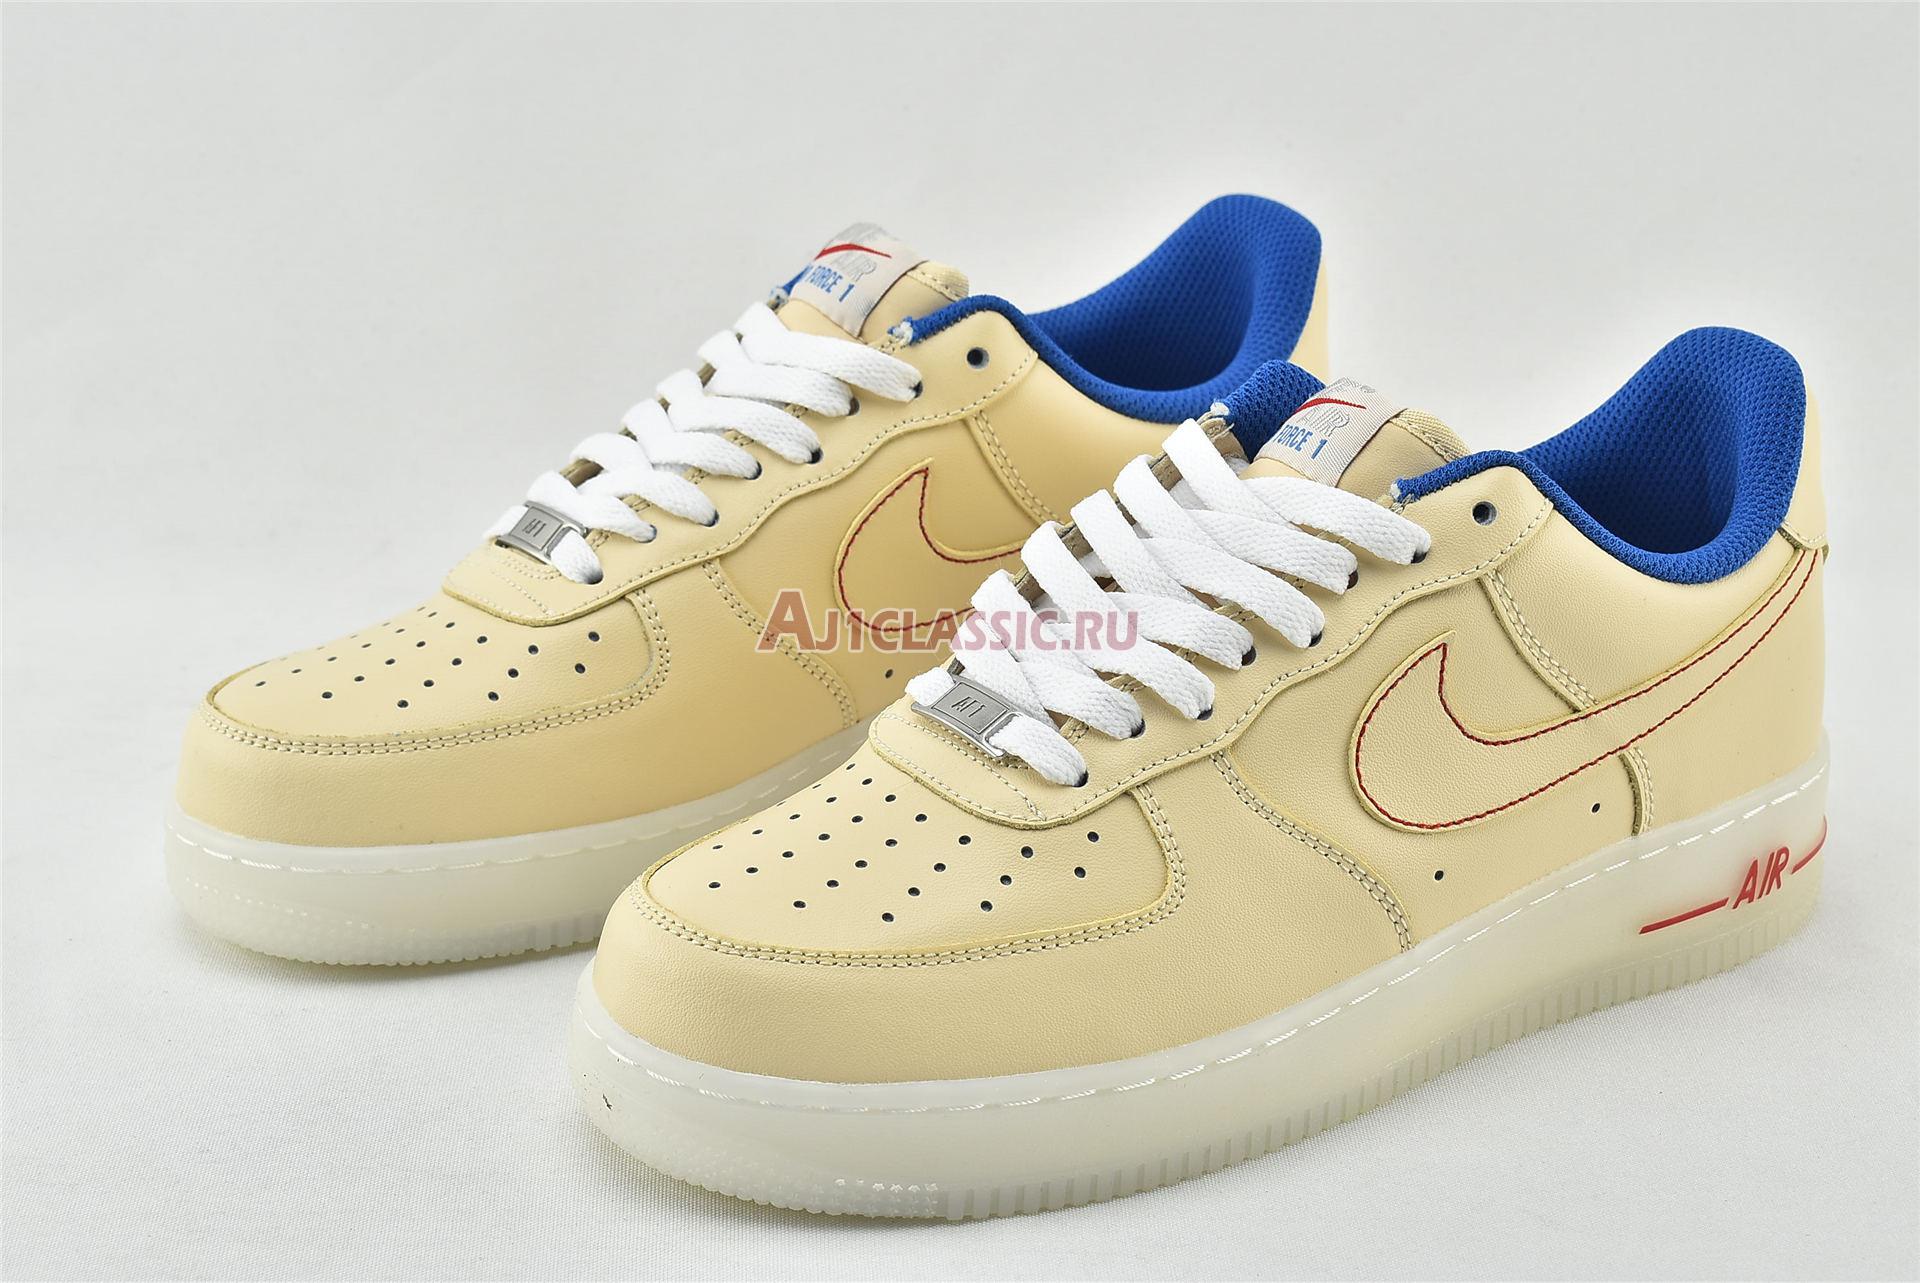 Nike Air Force 1 Low 07 LV8 "Ice Sole" DH0928-800